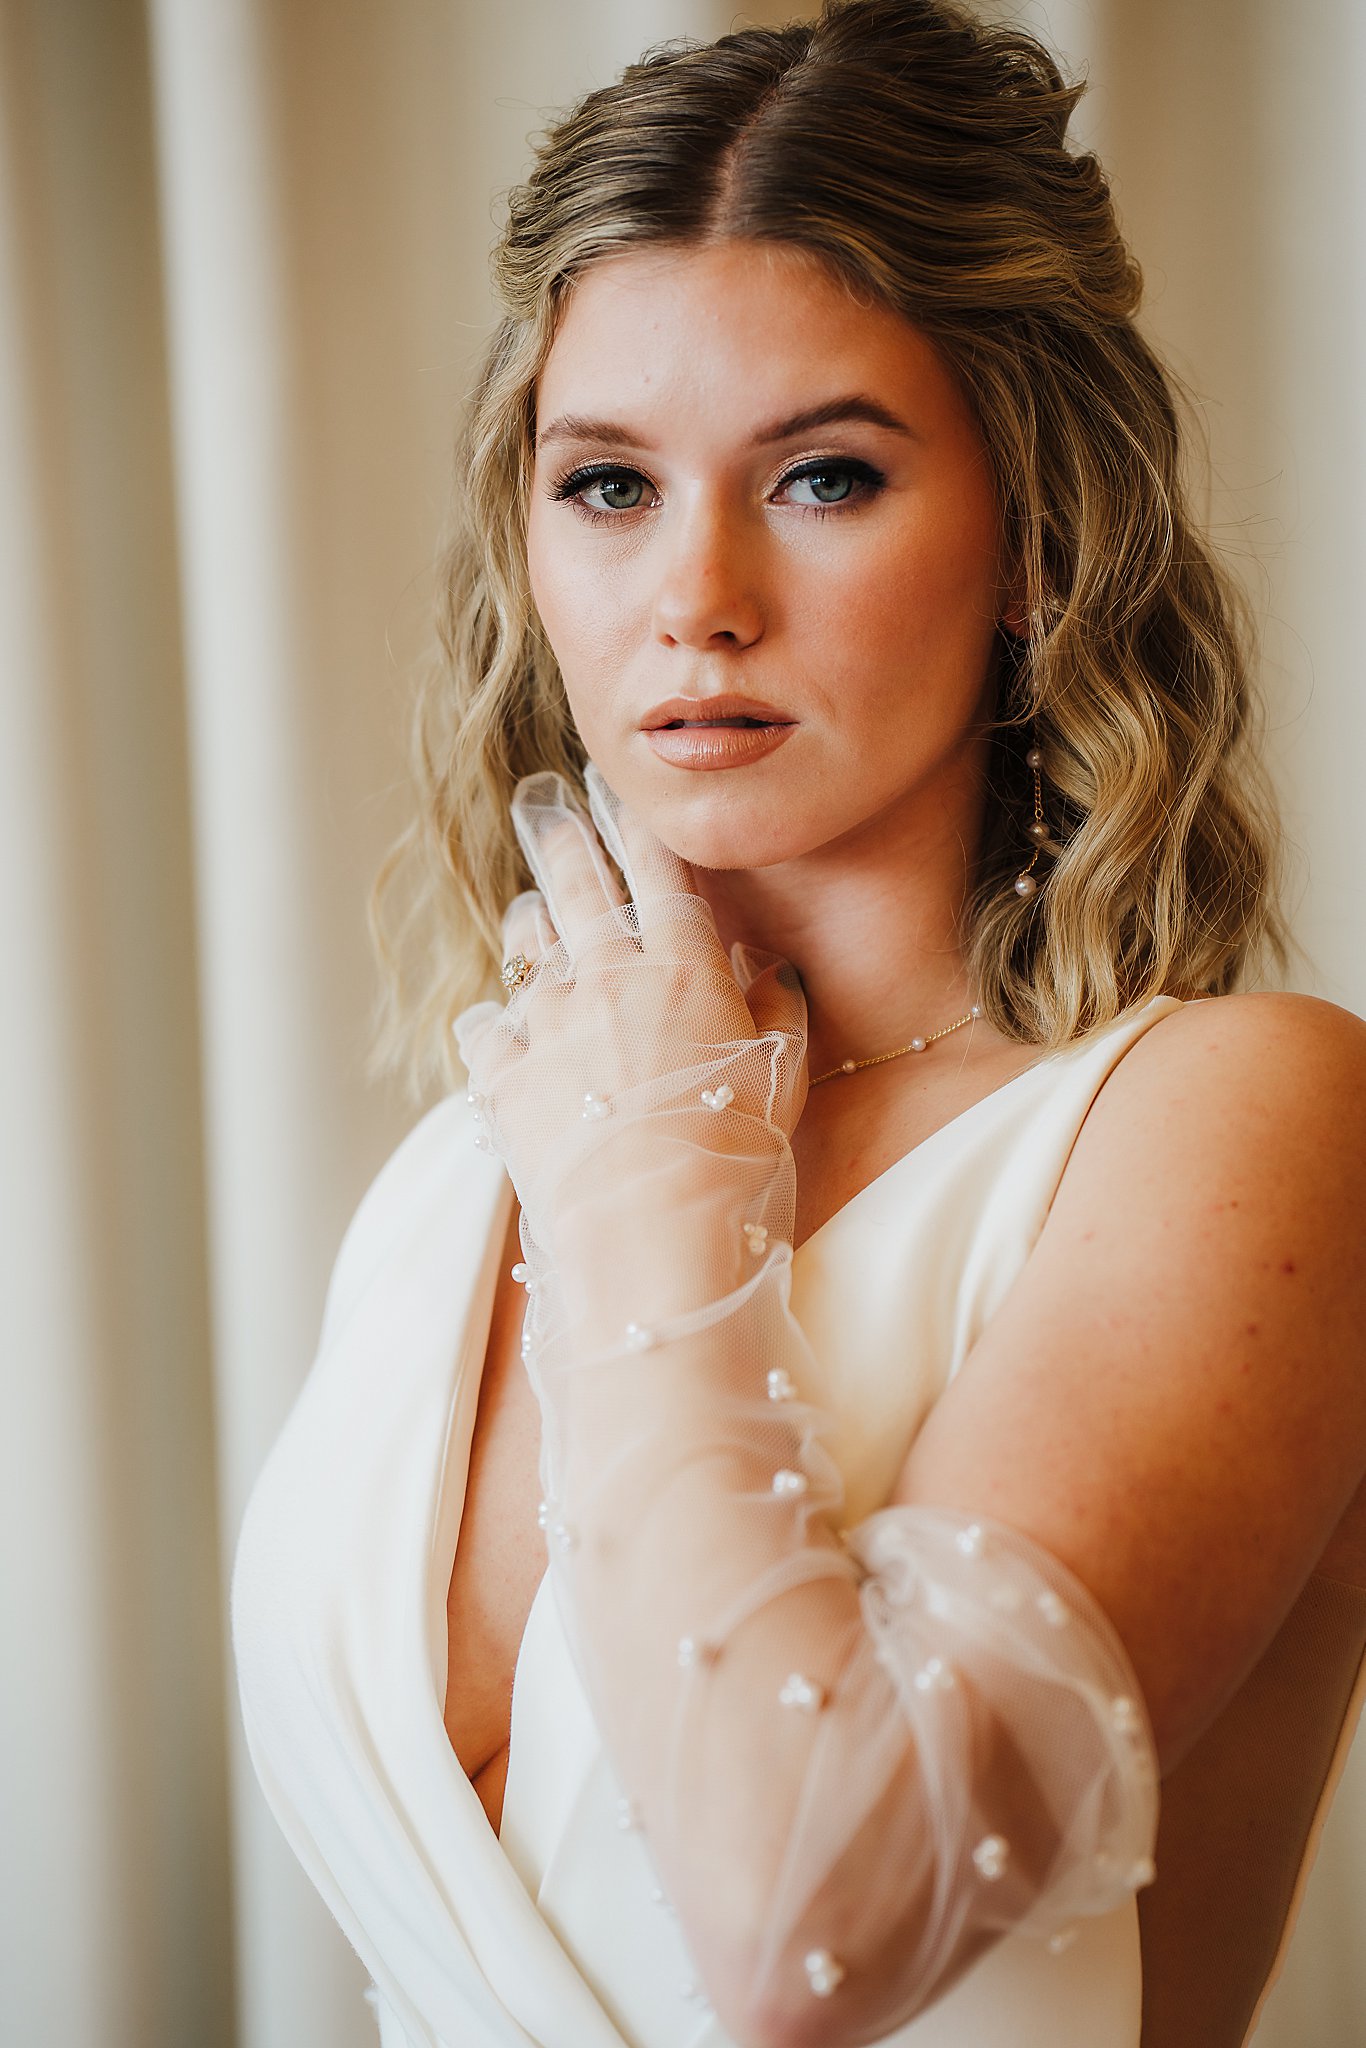 A stunning bride wearing a glove gently touches her cheek as she gazes into the camera, radiating elegance and beauty.